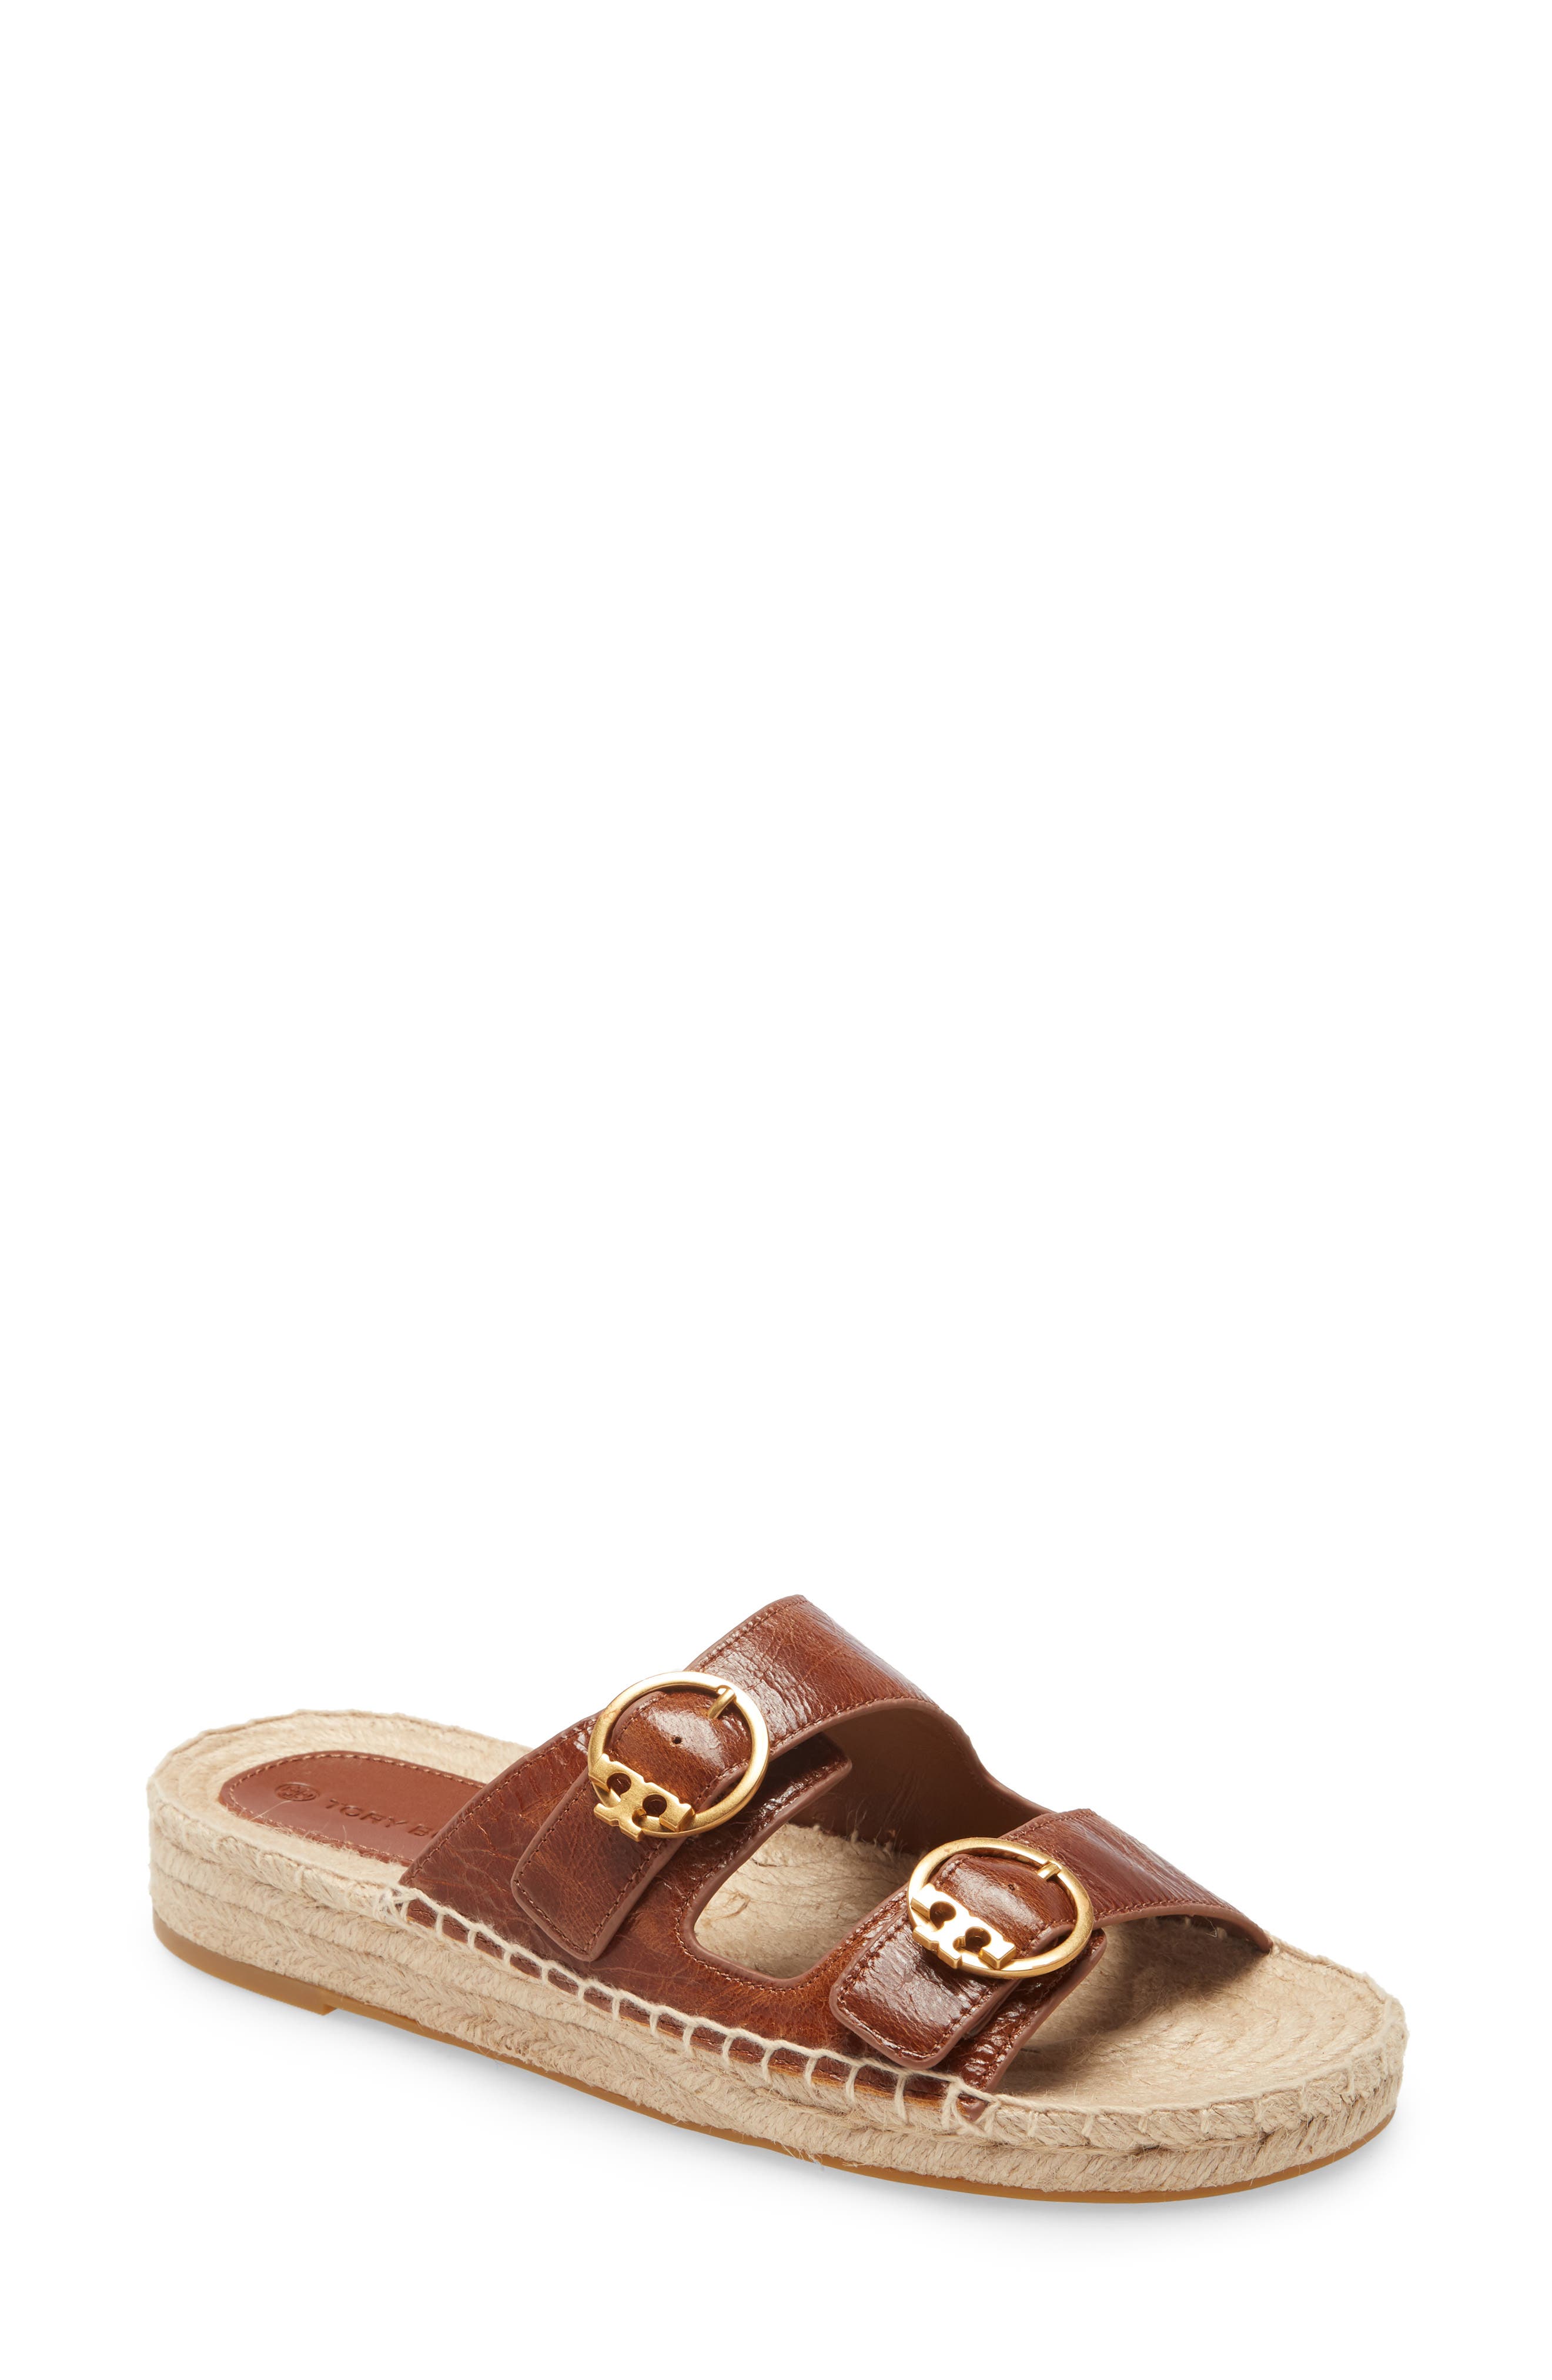 tory burch selby scarf sandal